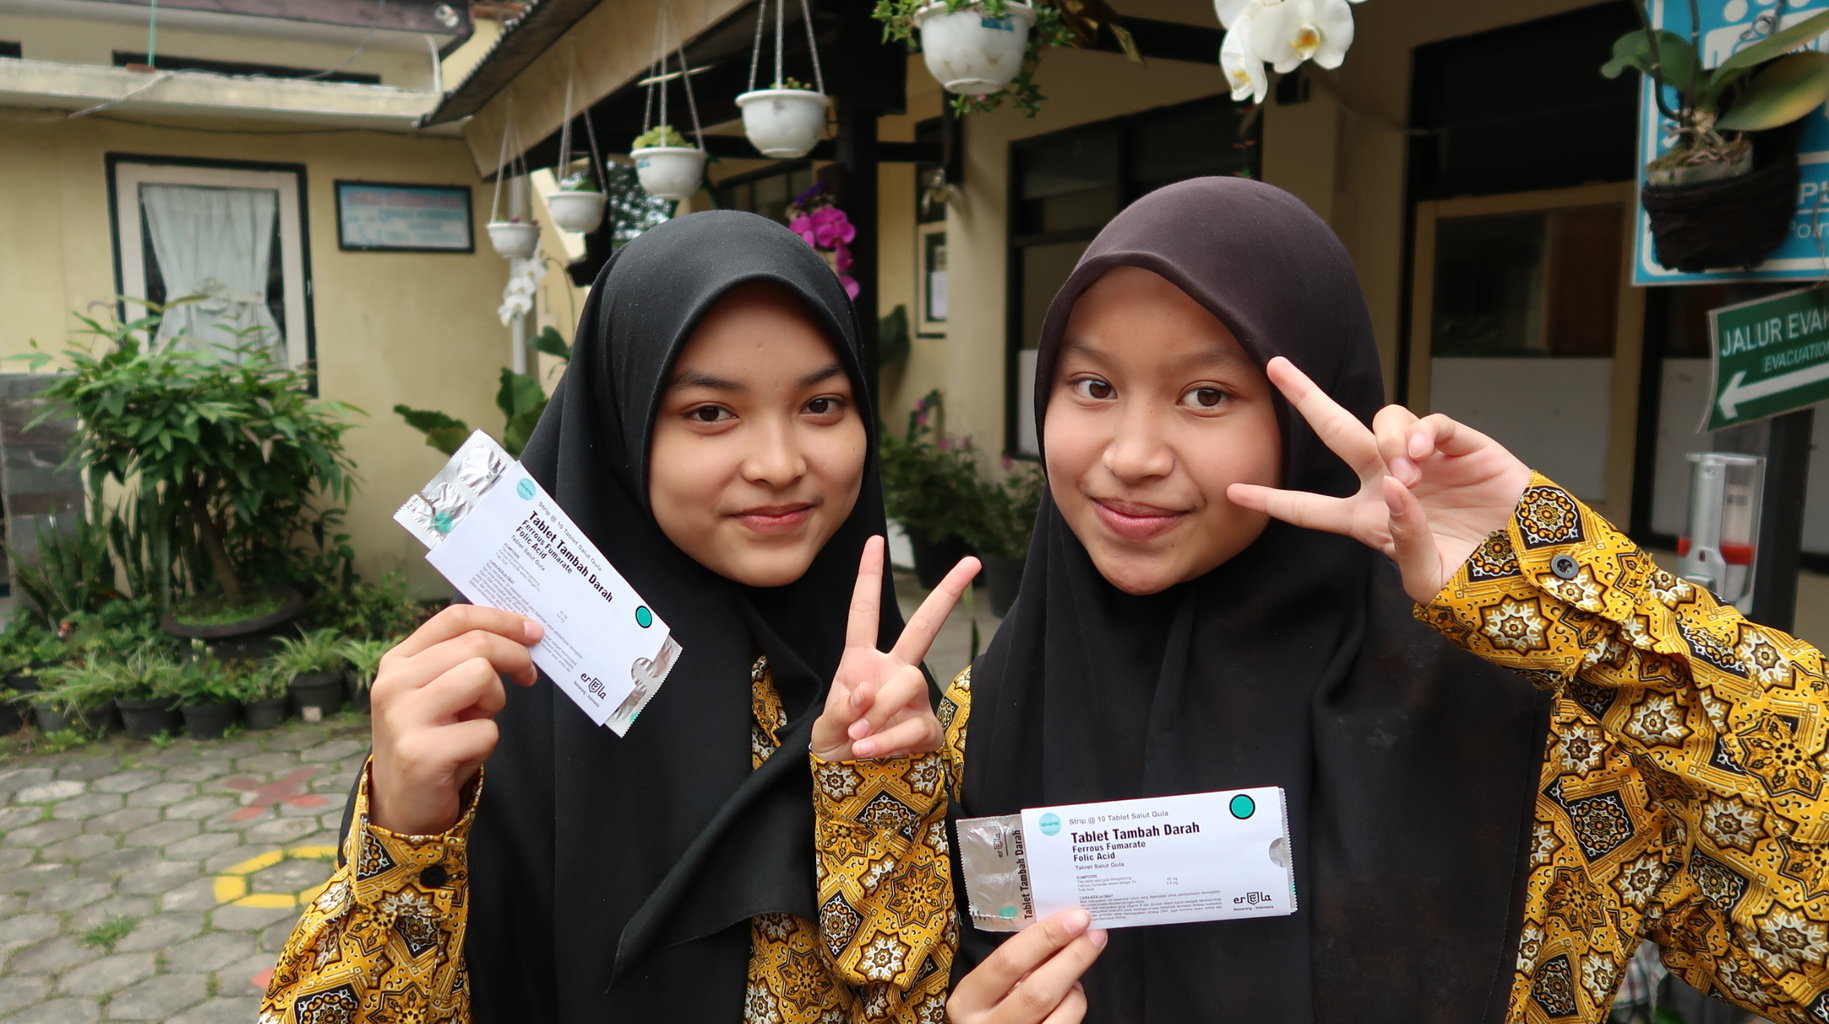 Two girls smile at the camera giving peace signs and holding up packages of weekly iron and folic acid supplementation.